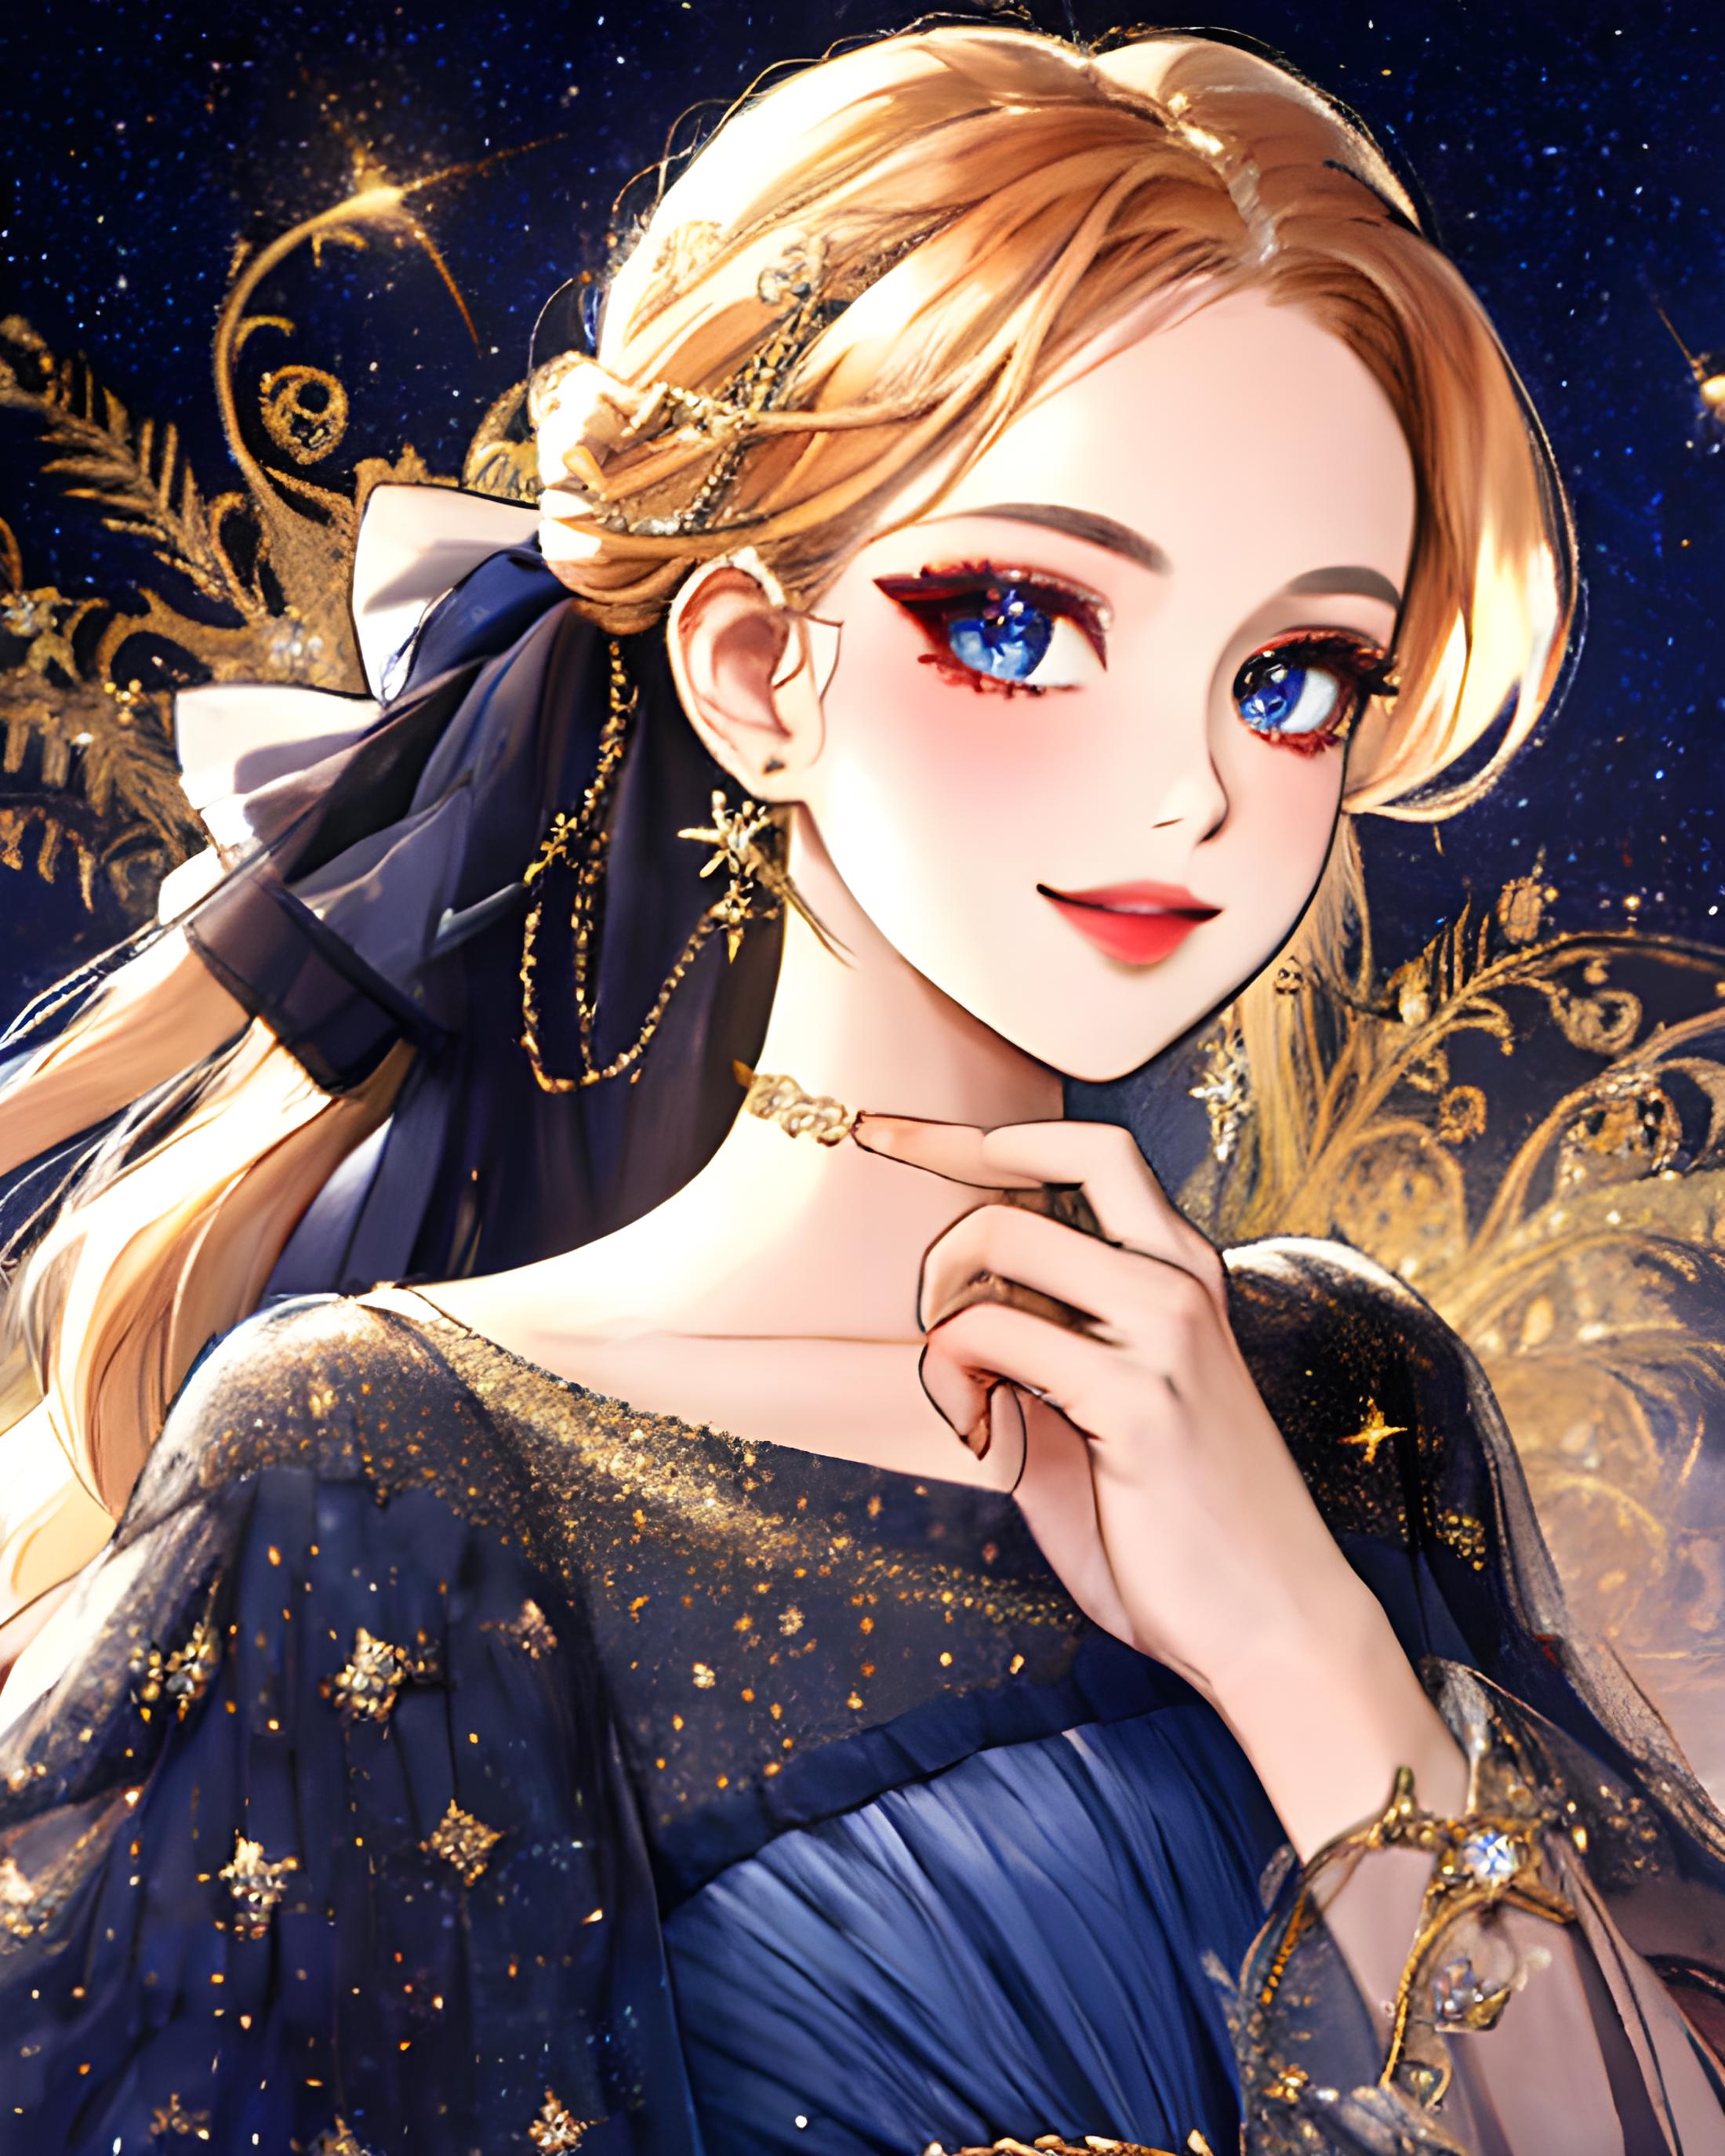 Starry Tulle image by KimiKoro